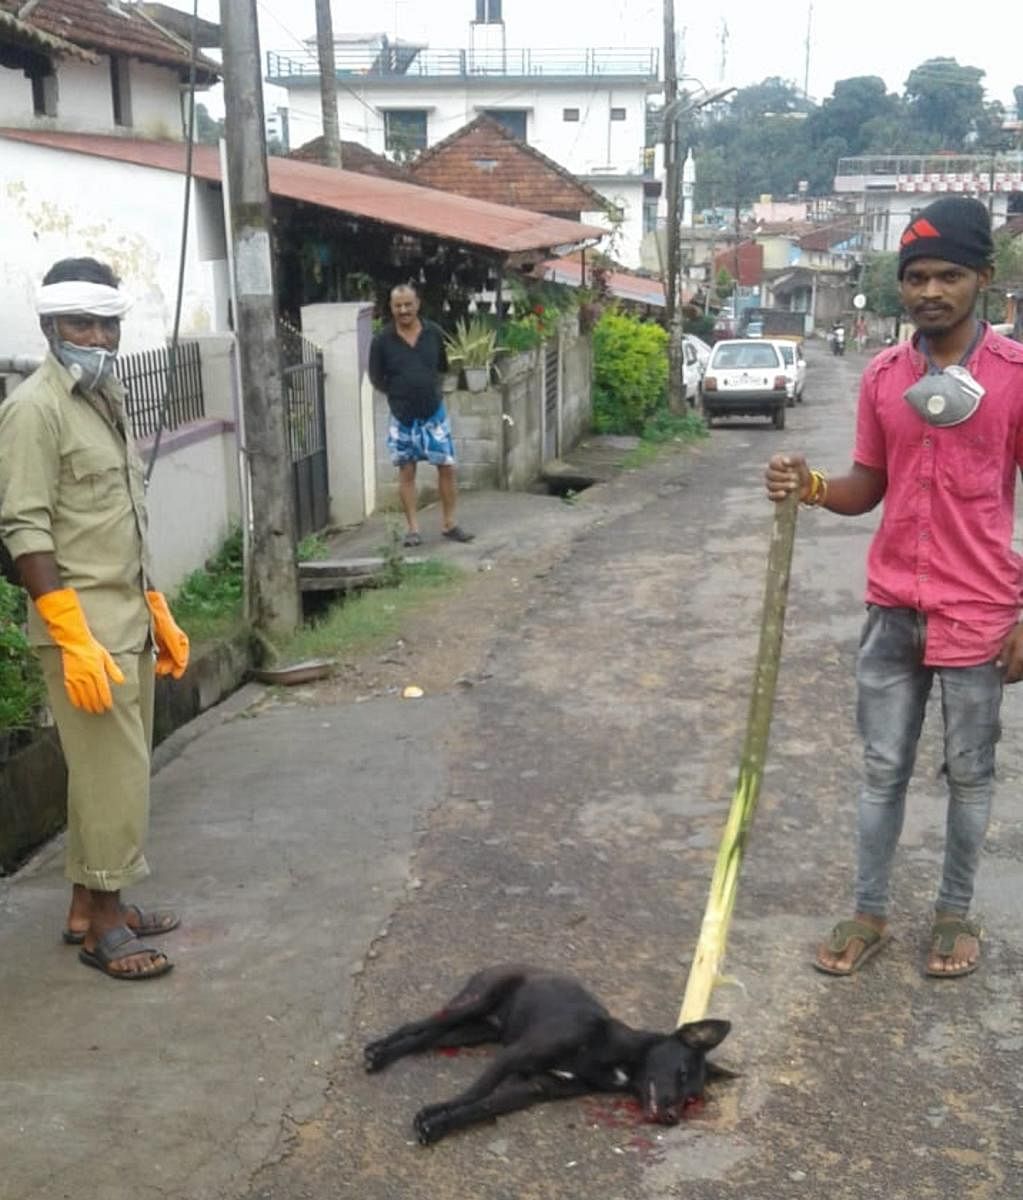 An operation to detect and kill rabies-infected dogs was carried out on Saturday.